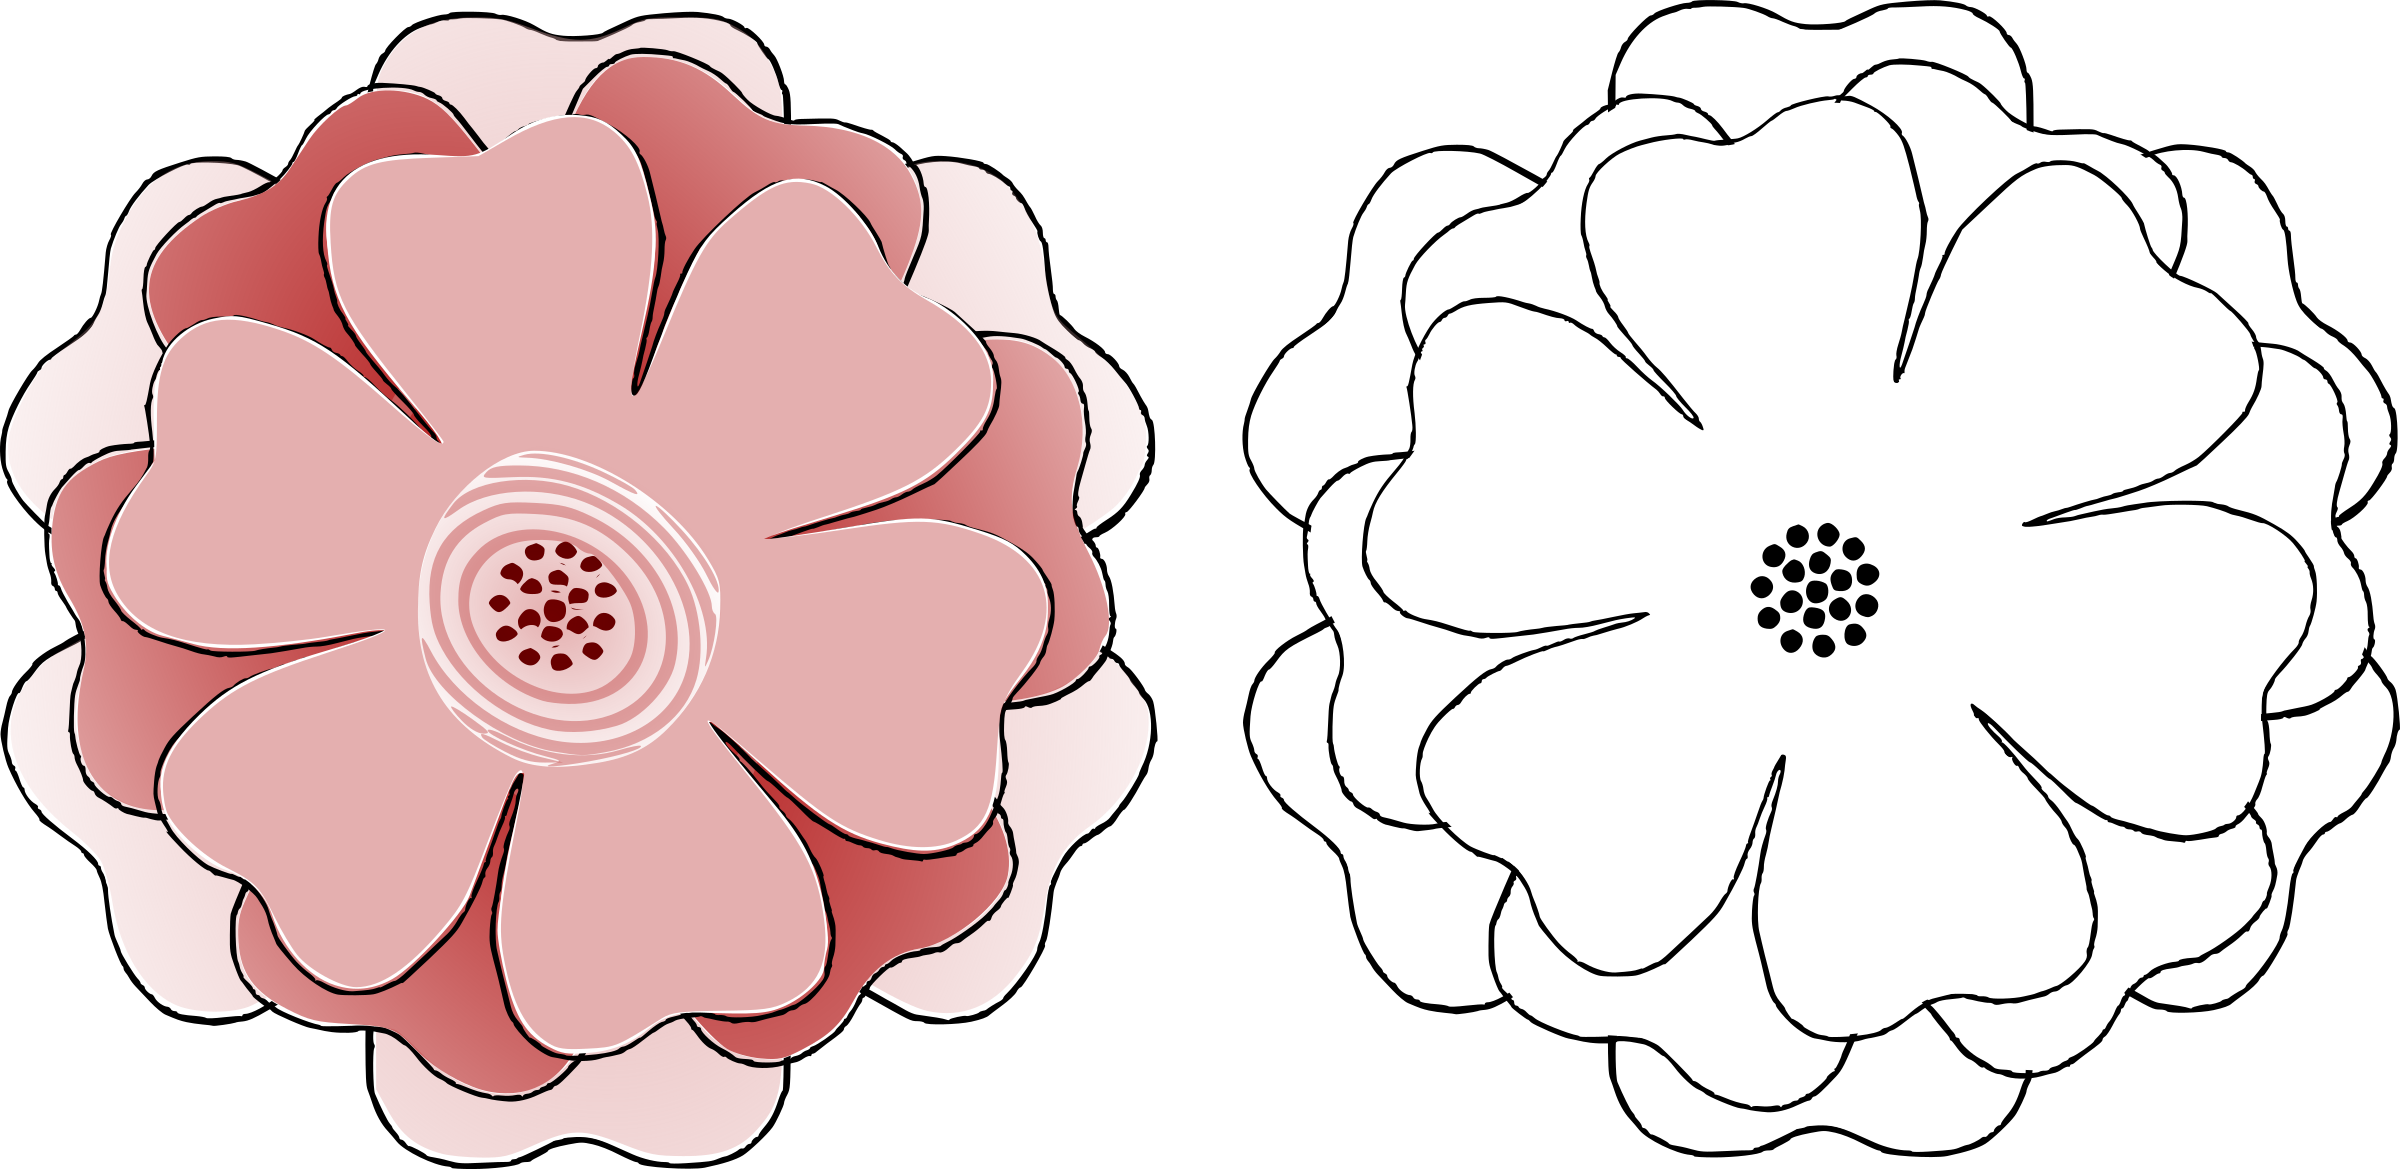 Flower Petal Template Free Printable Flower Petal Templates For Making Paper Flowers The